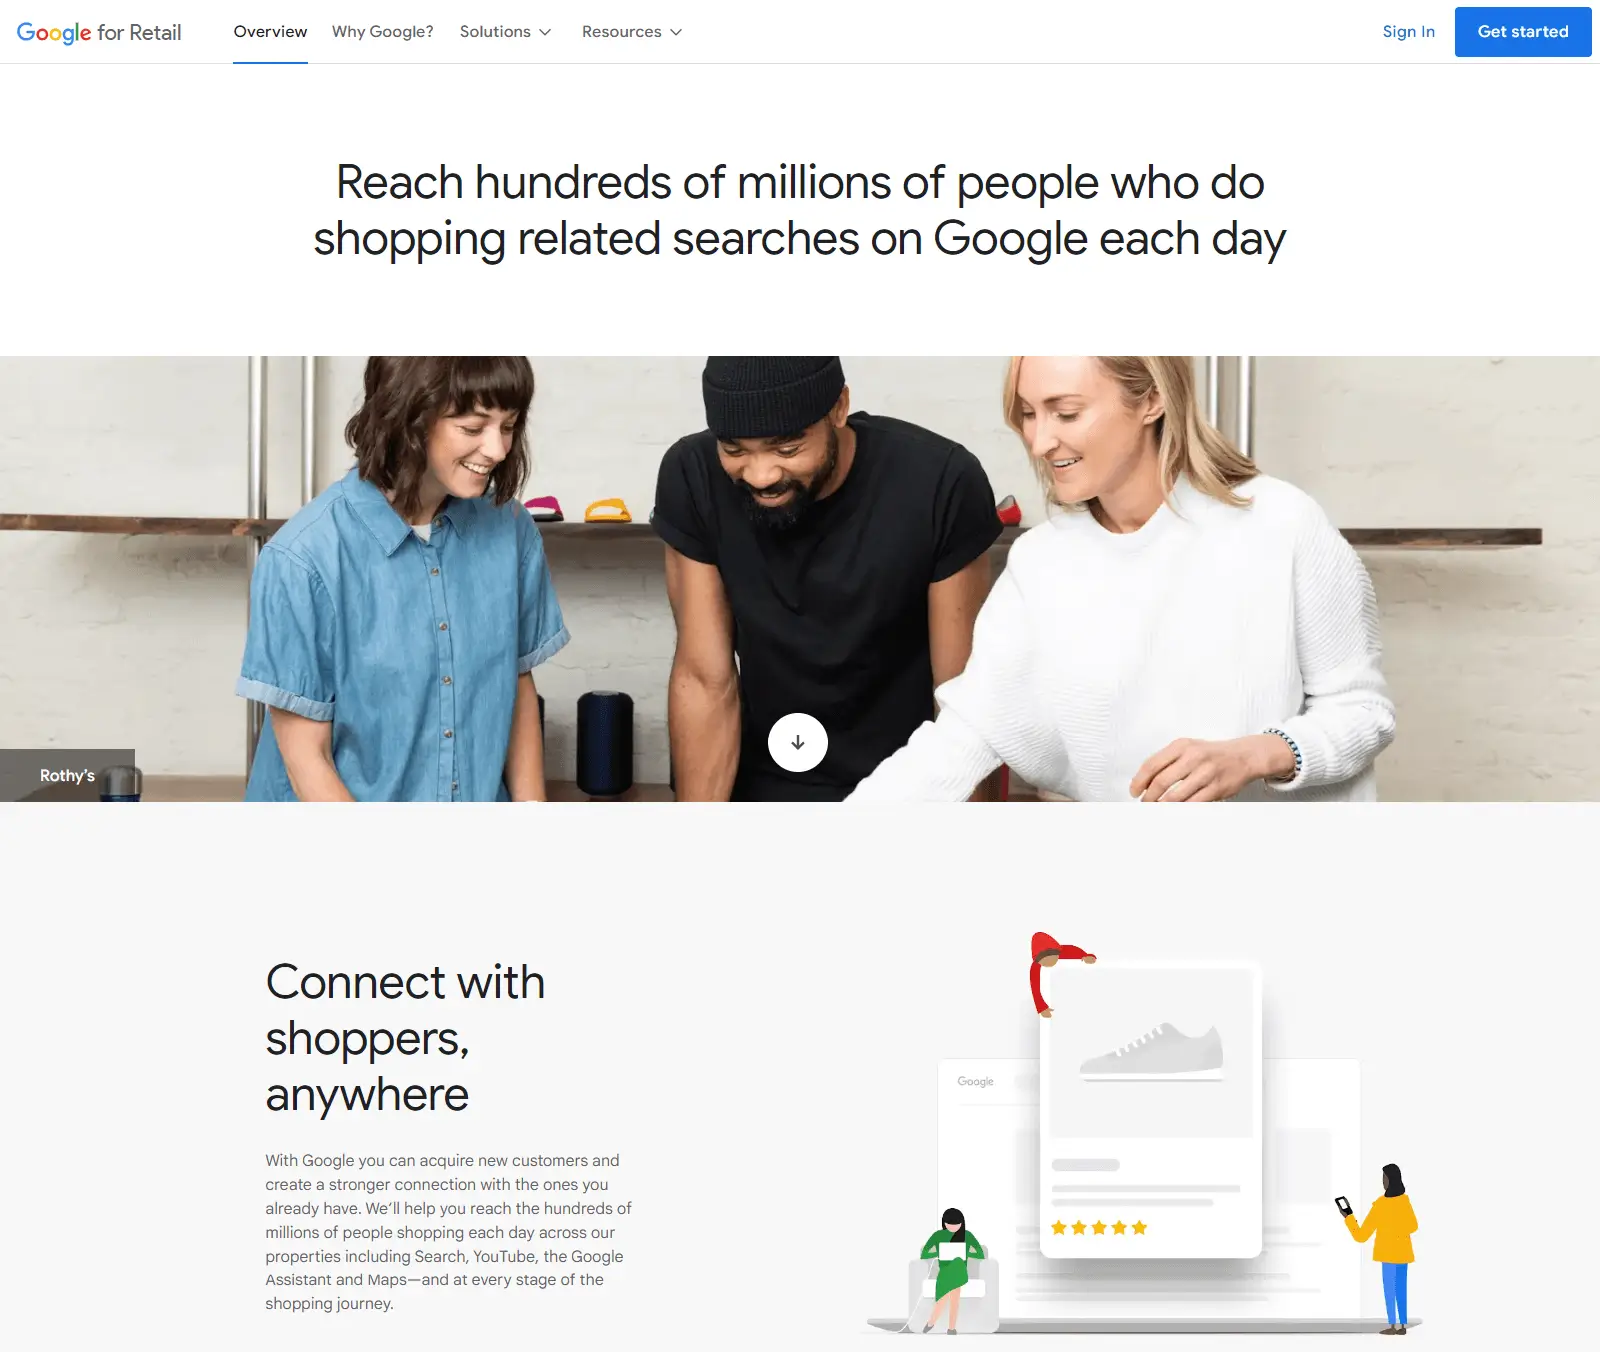 Google-for-Retail-Drive-Sales-Acquire-New-Customers